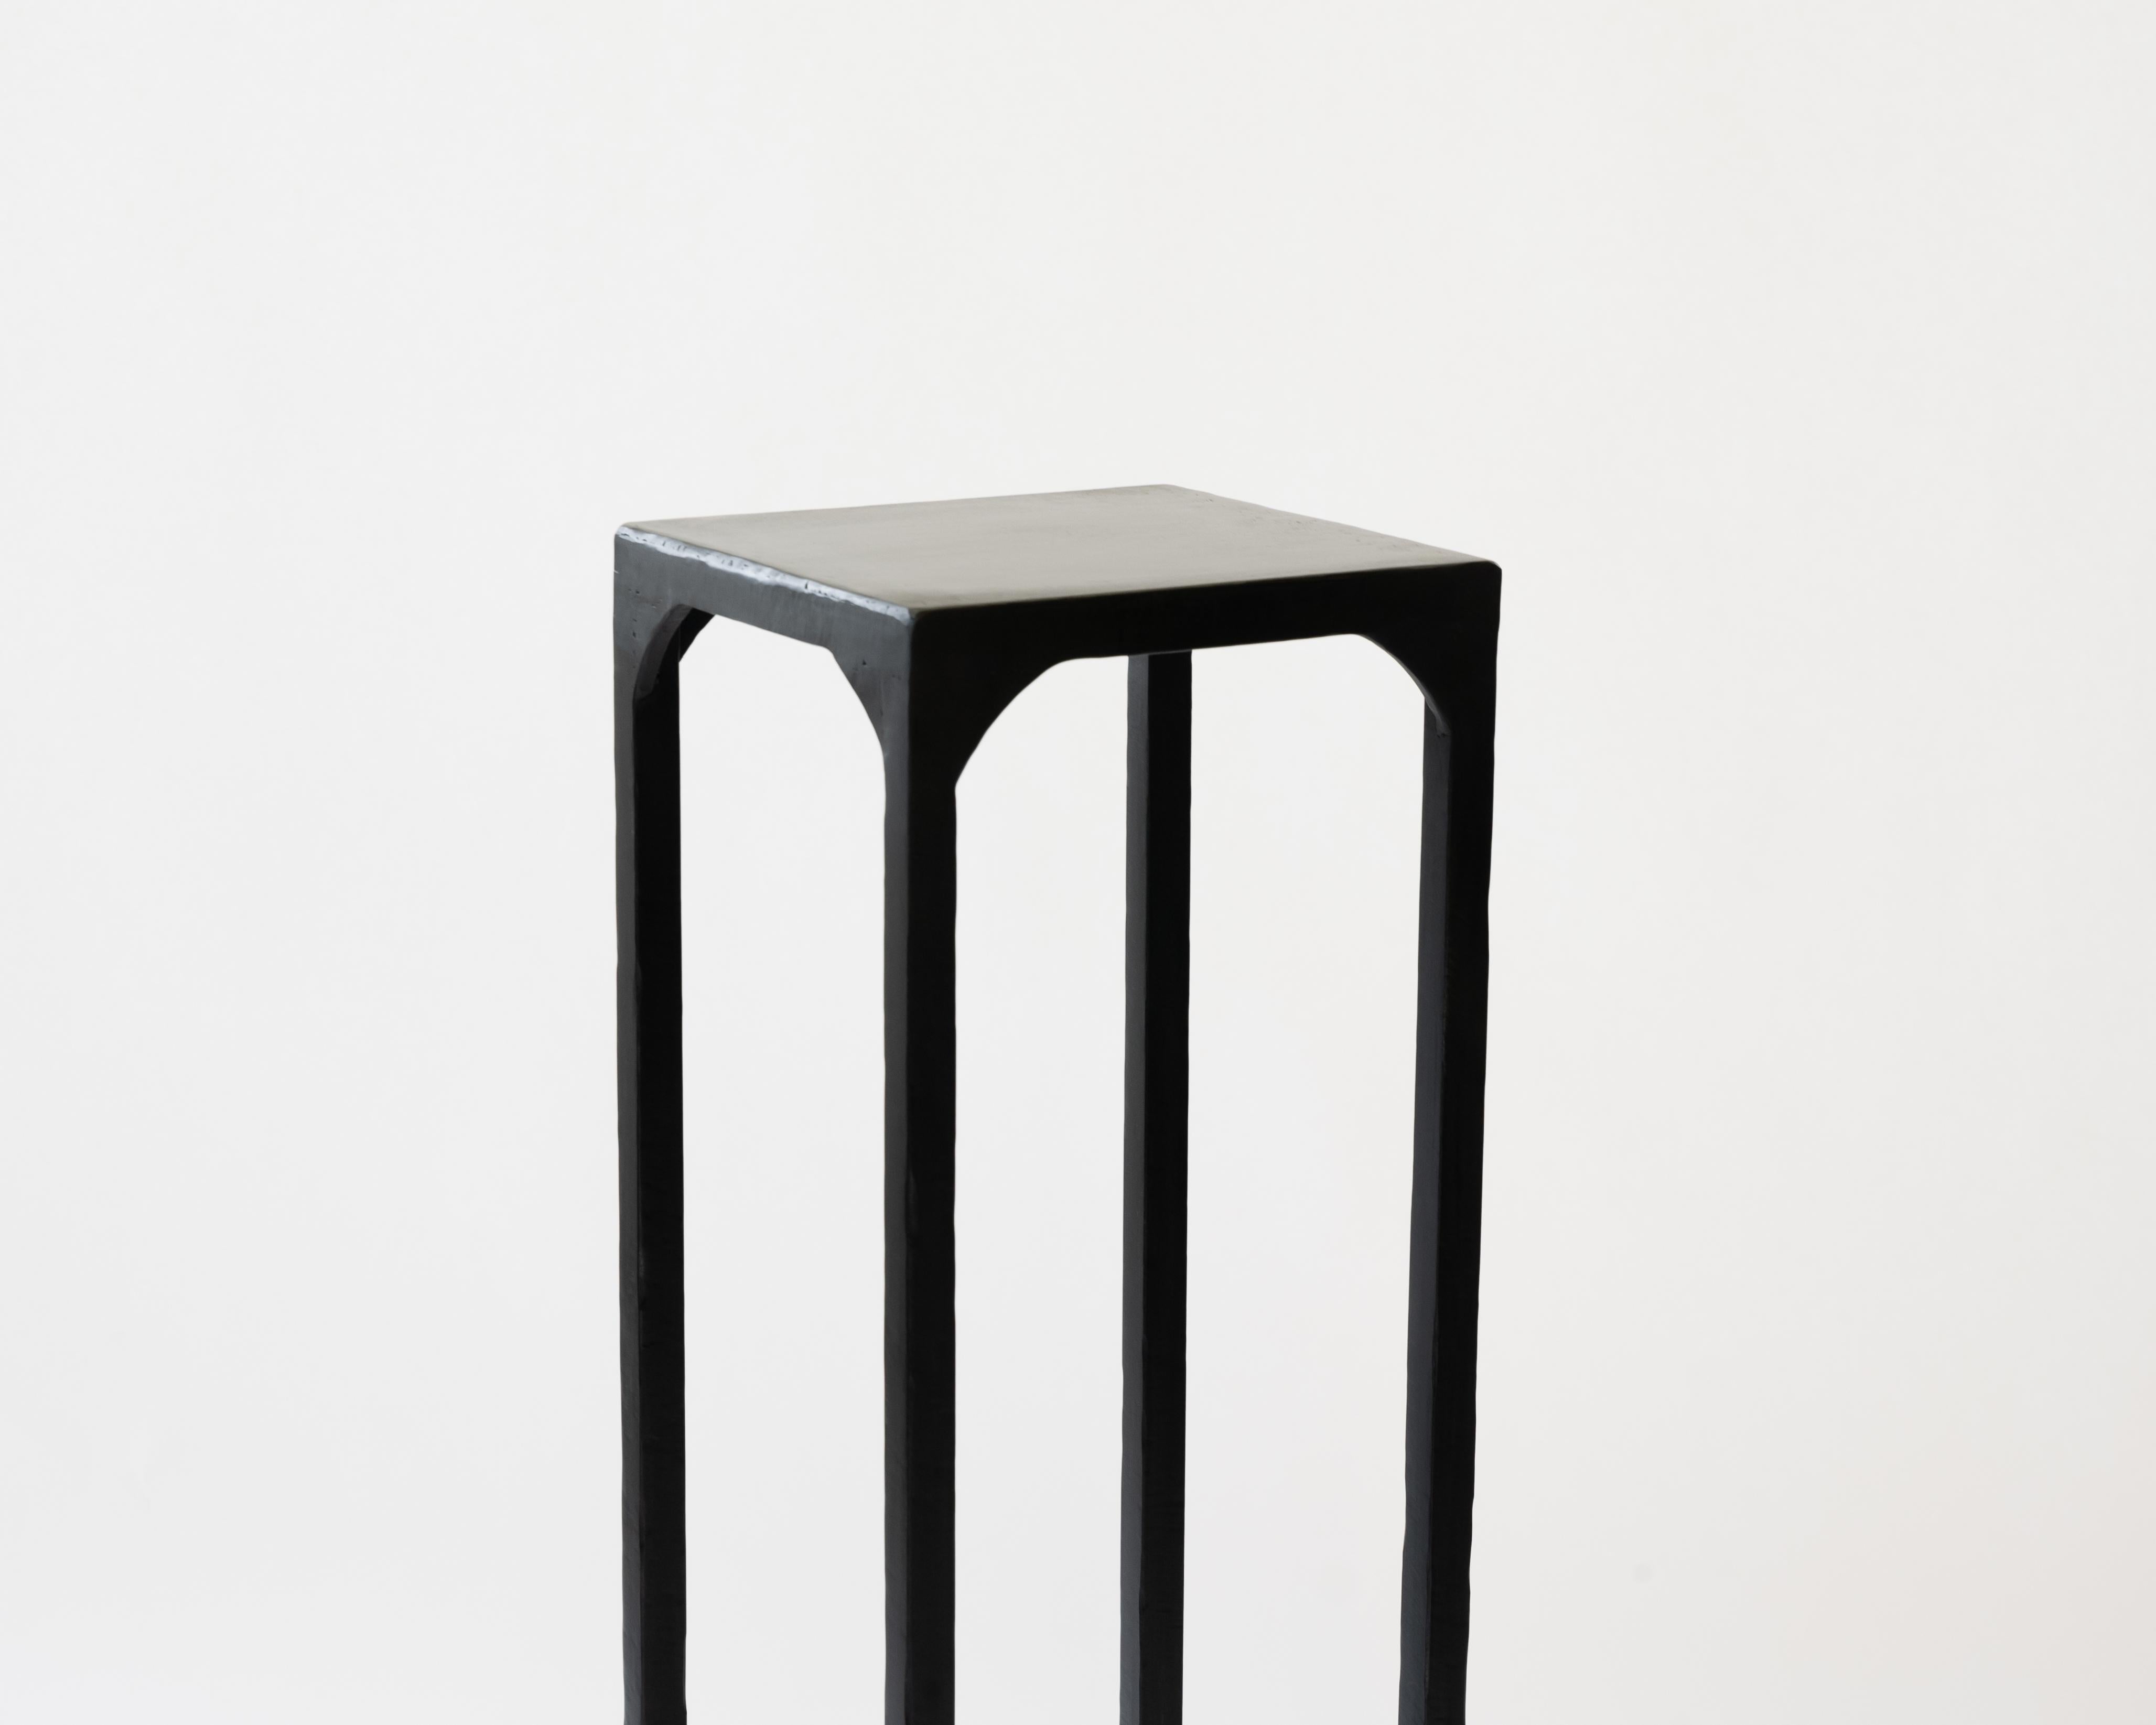 Cast Pedestal Table Modern Dynamic Geometric Handcrafted Blackened and Waxed Steel